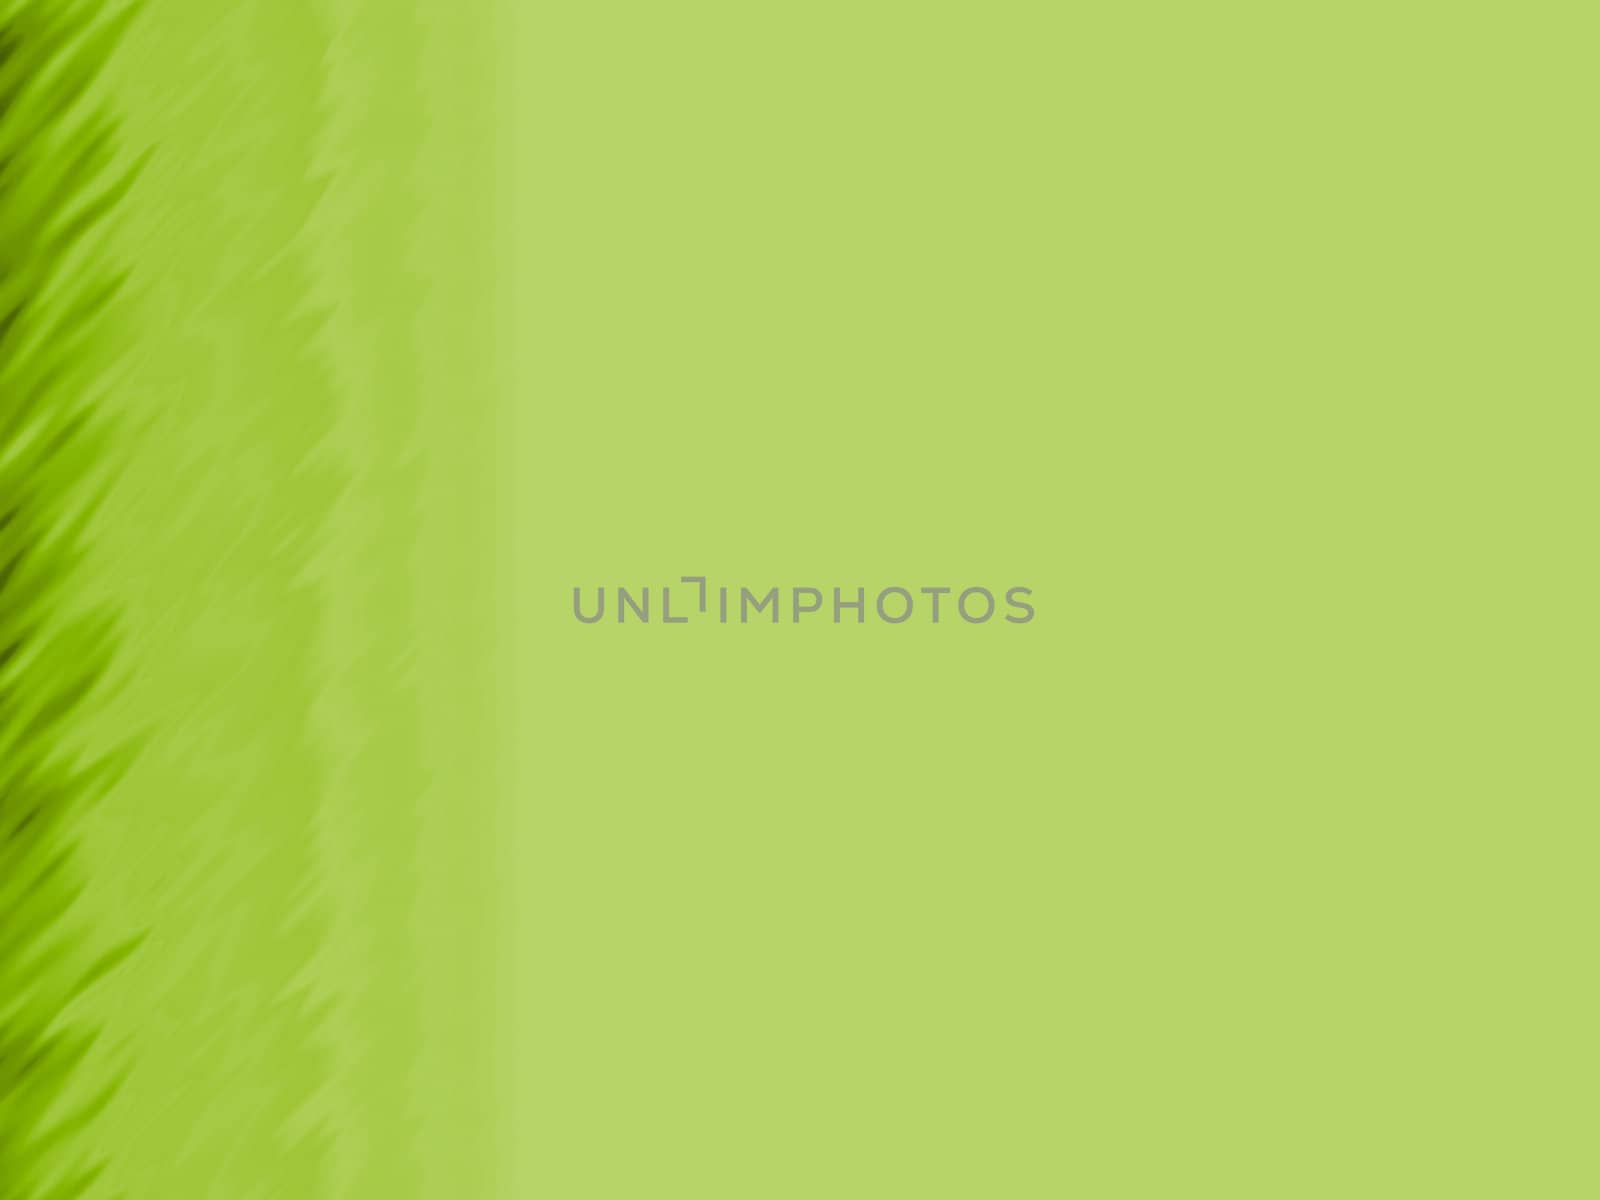 An abstract illustration of a grass green background.